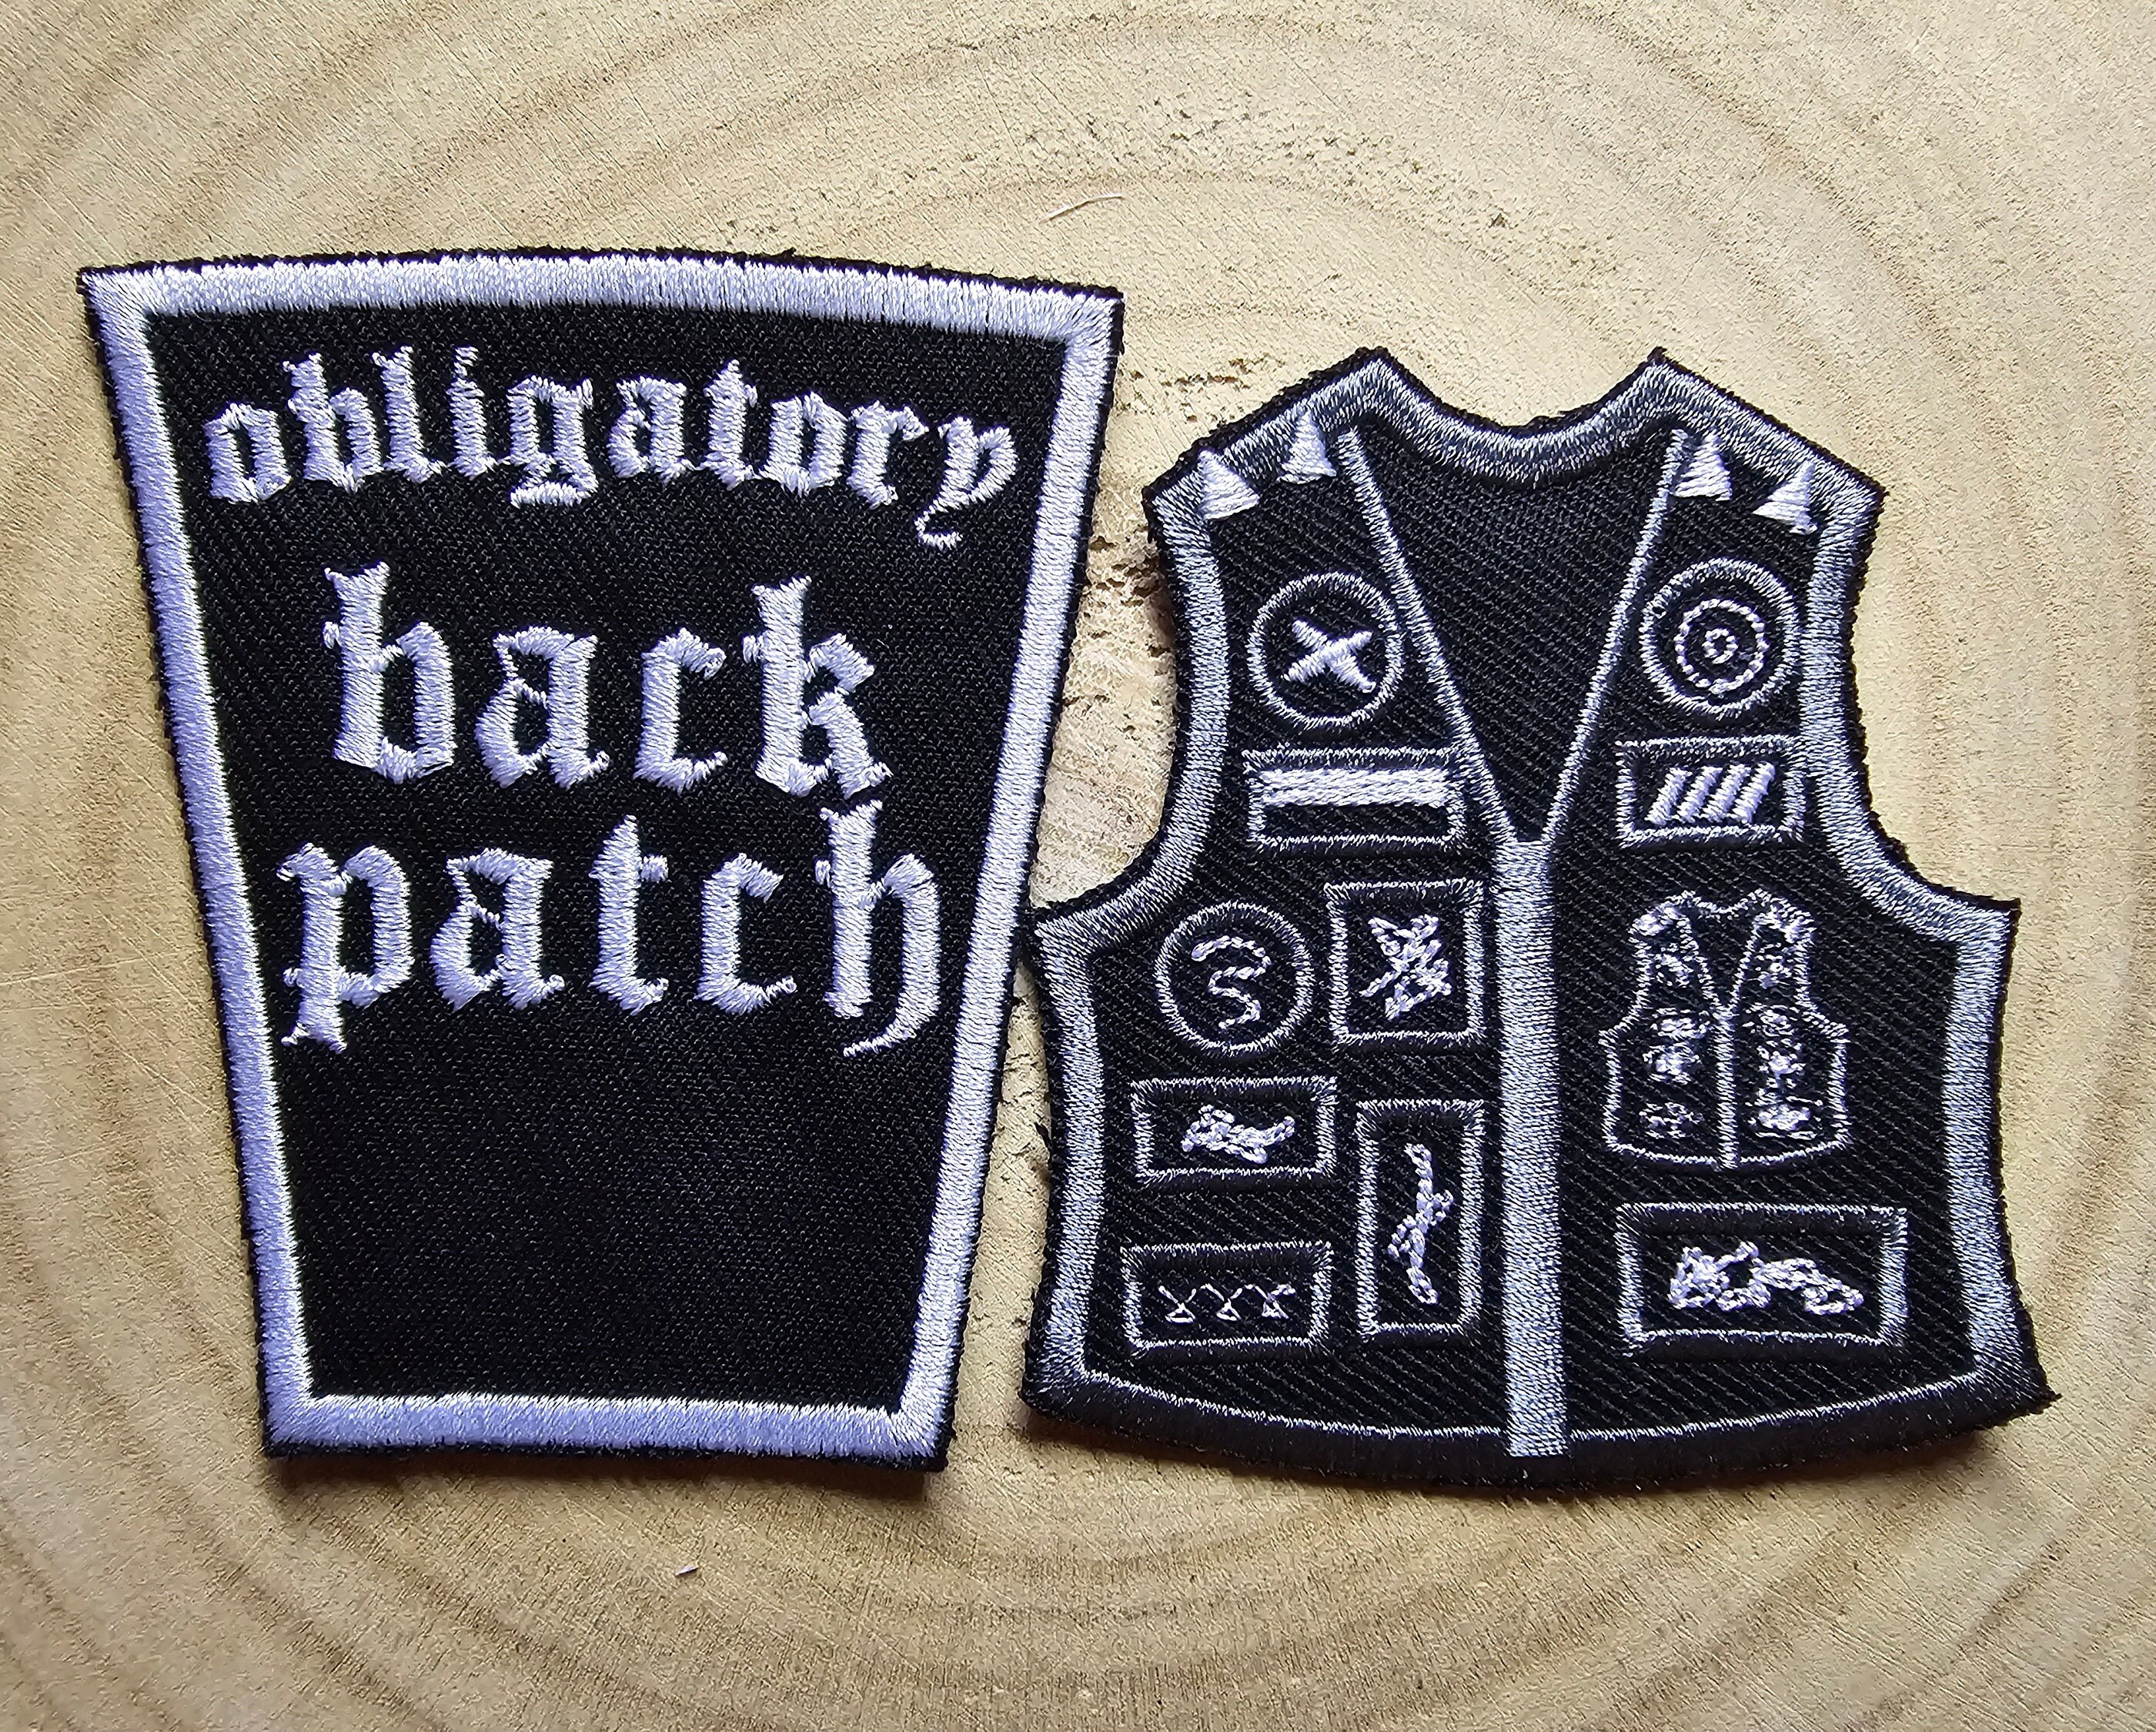 Volbeat battle vest (faded grey with all b&w patches.